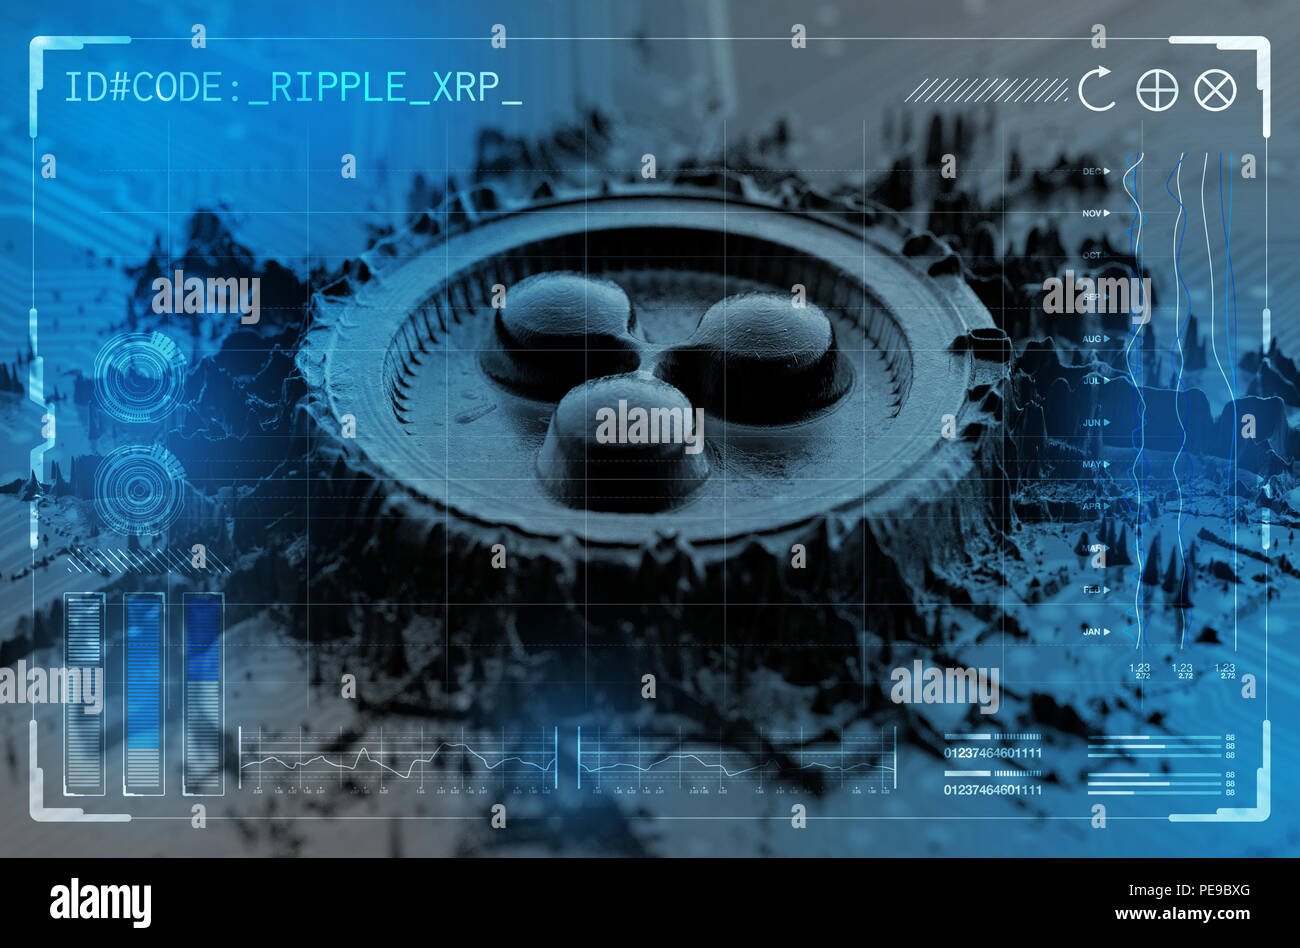 Extruded metal particles that build up to form a physical ripple cryptocurrency symbol overlaid with a technical data analysis interface - 3D render Stock Photo